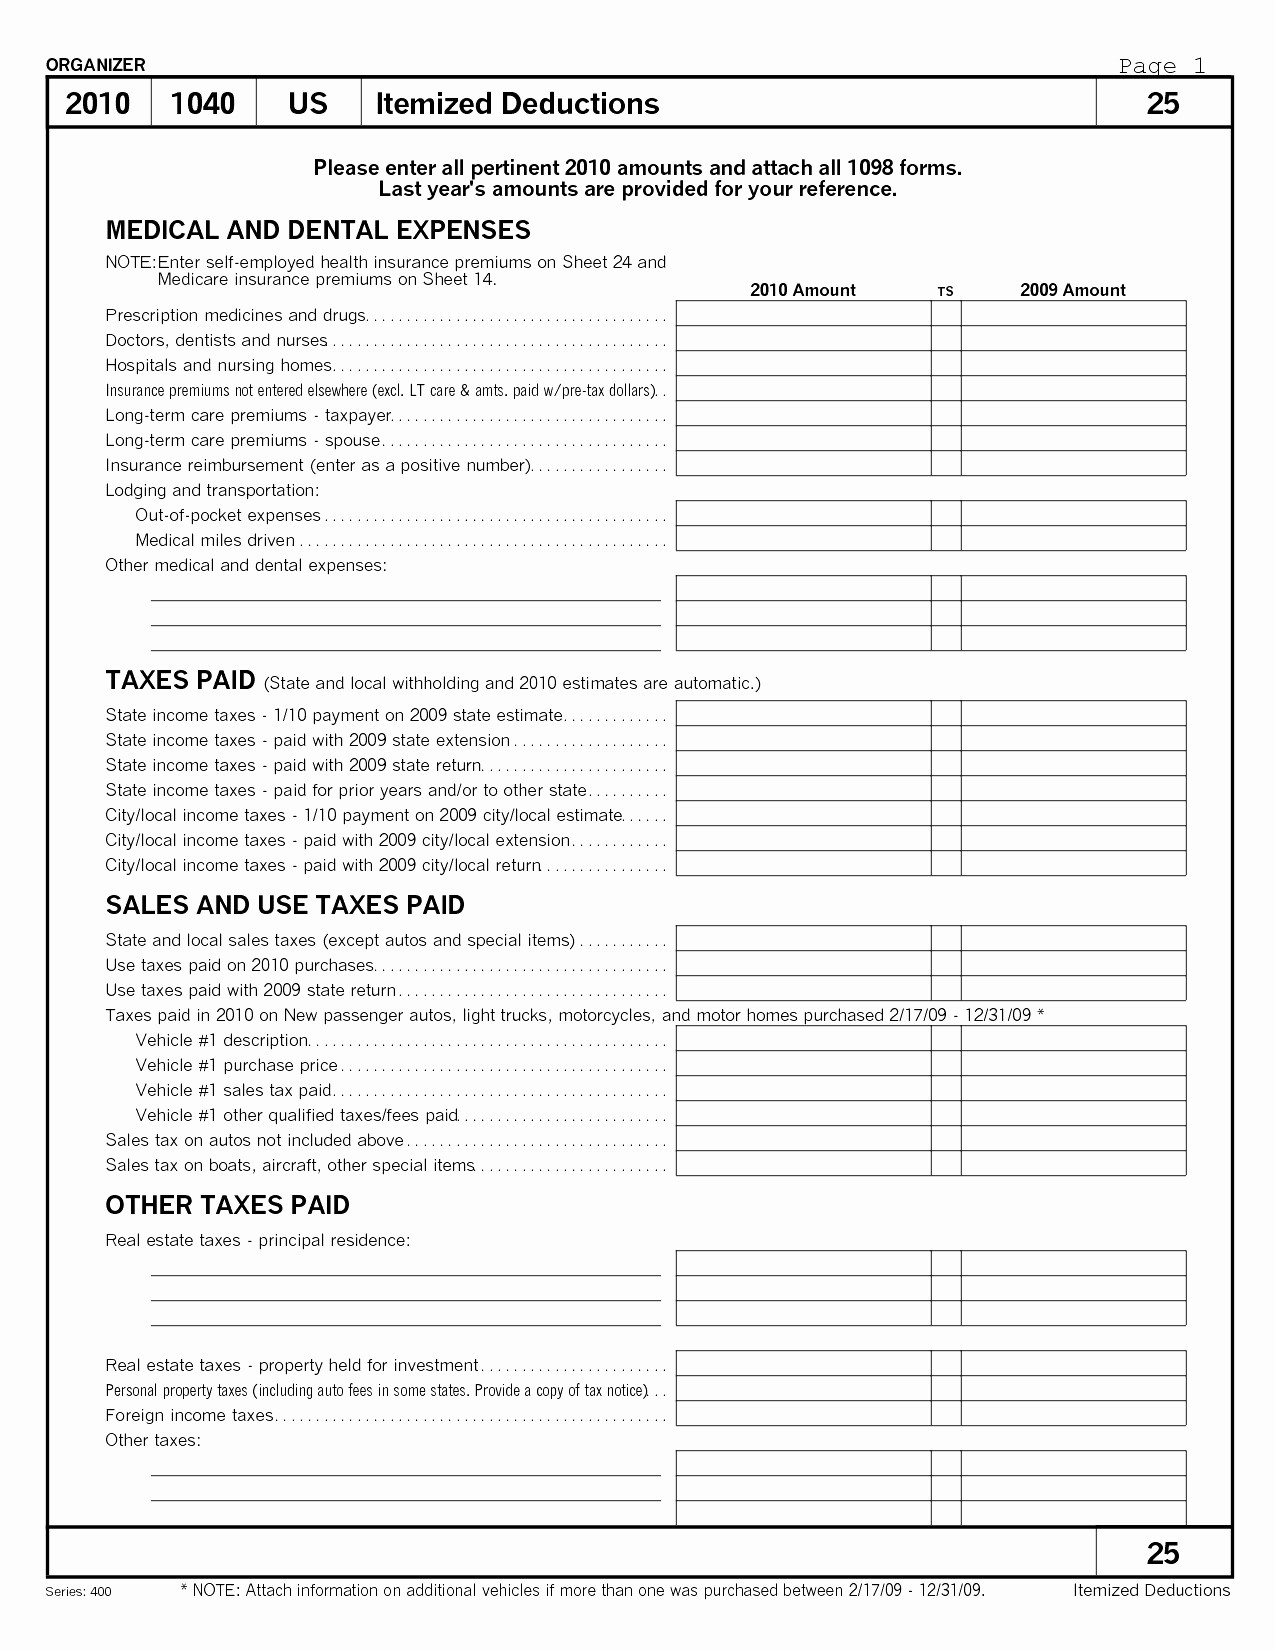 Business Itemized Deductions Worksheet Inspirational Document For Small